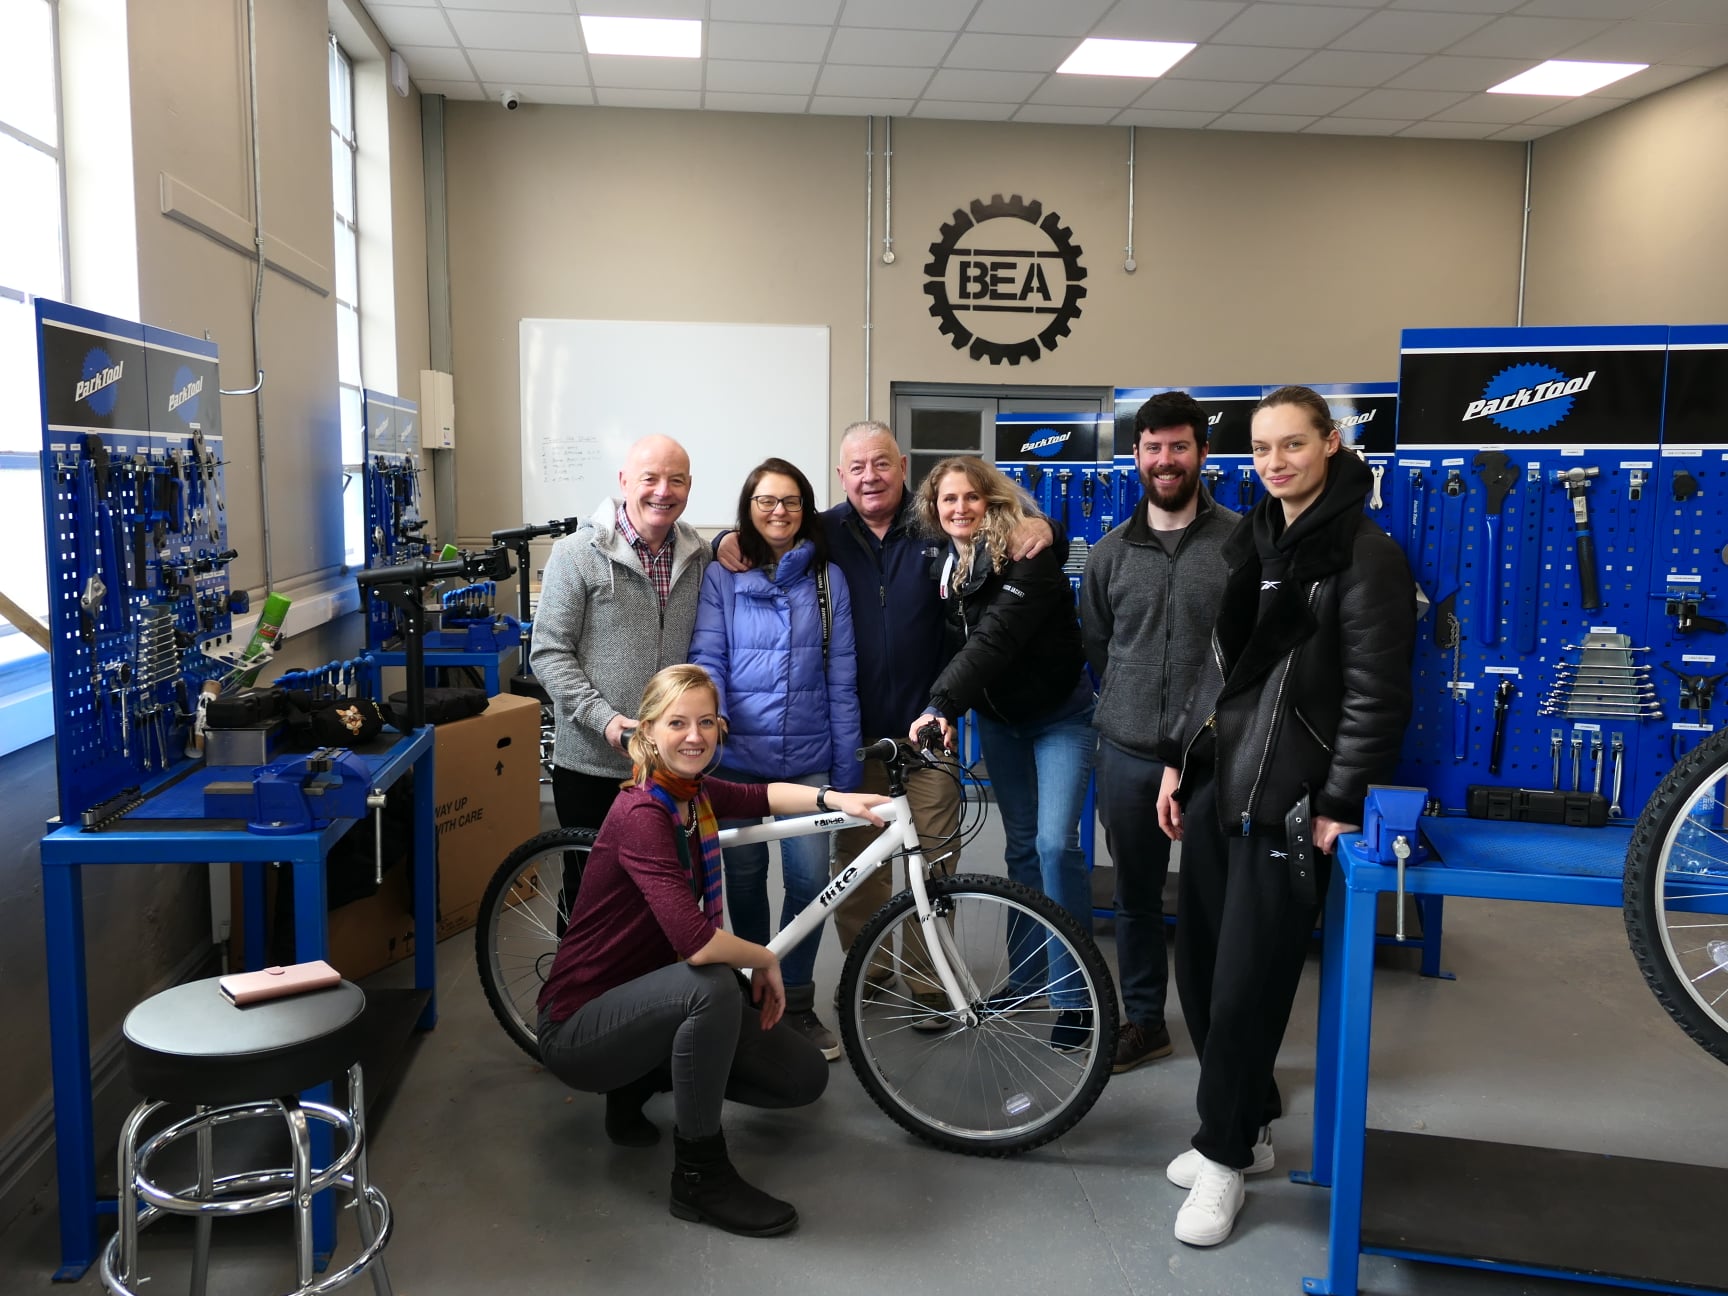 Bicycle Engineering Academy - A new state-of-the-art, state-funded Bicycle Engineering Academy workshop has opened its doors in Limerick.